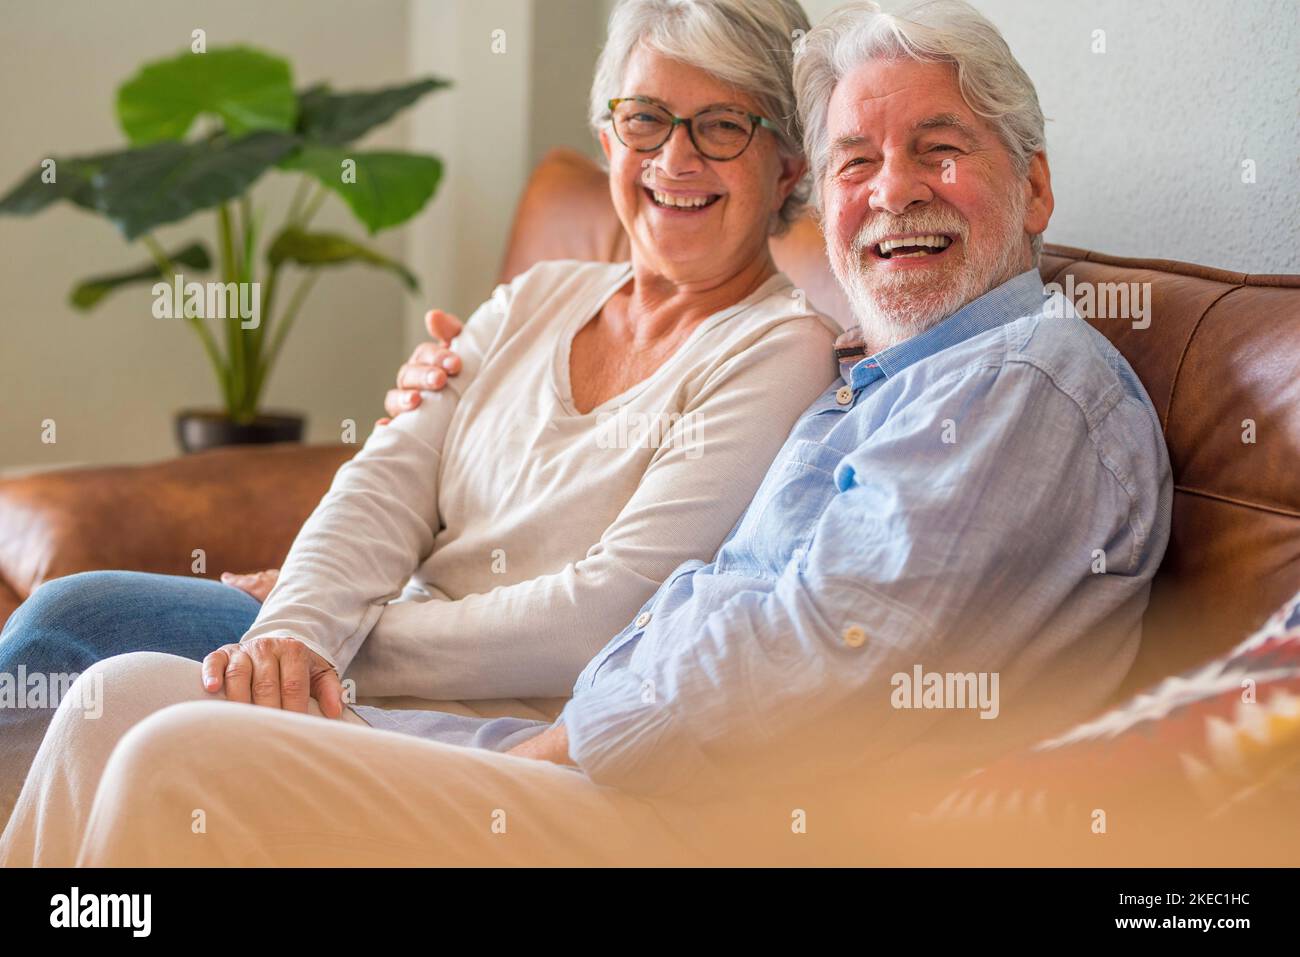 Portrait of cheerful senior couple embracing while sitting on sofa and smiling. Elderly happy couple relaxing and posing in front of camera sitting in living room. Stock Photo